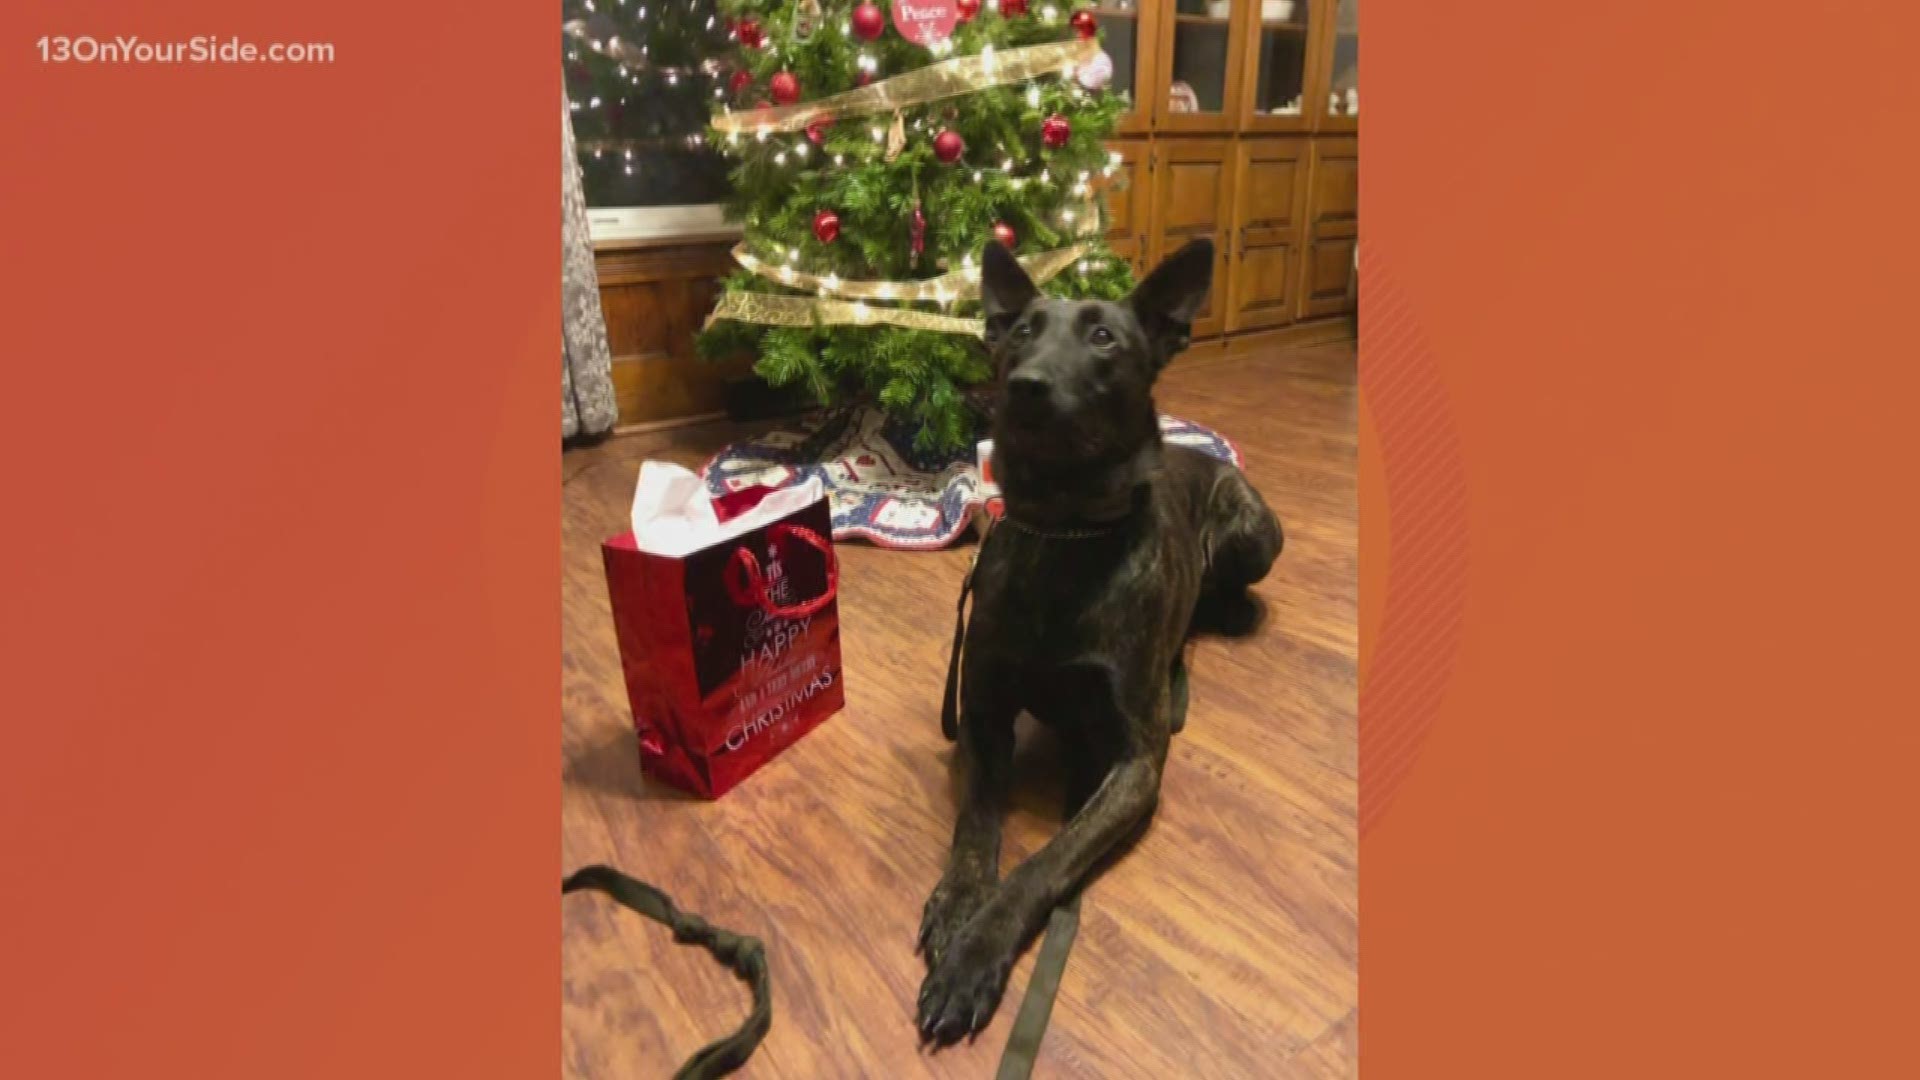 A new K9 member of the Mason County Sheriff's Office has seen his first success, just as 2019 was coming to a close.